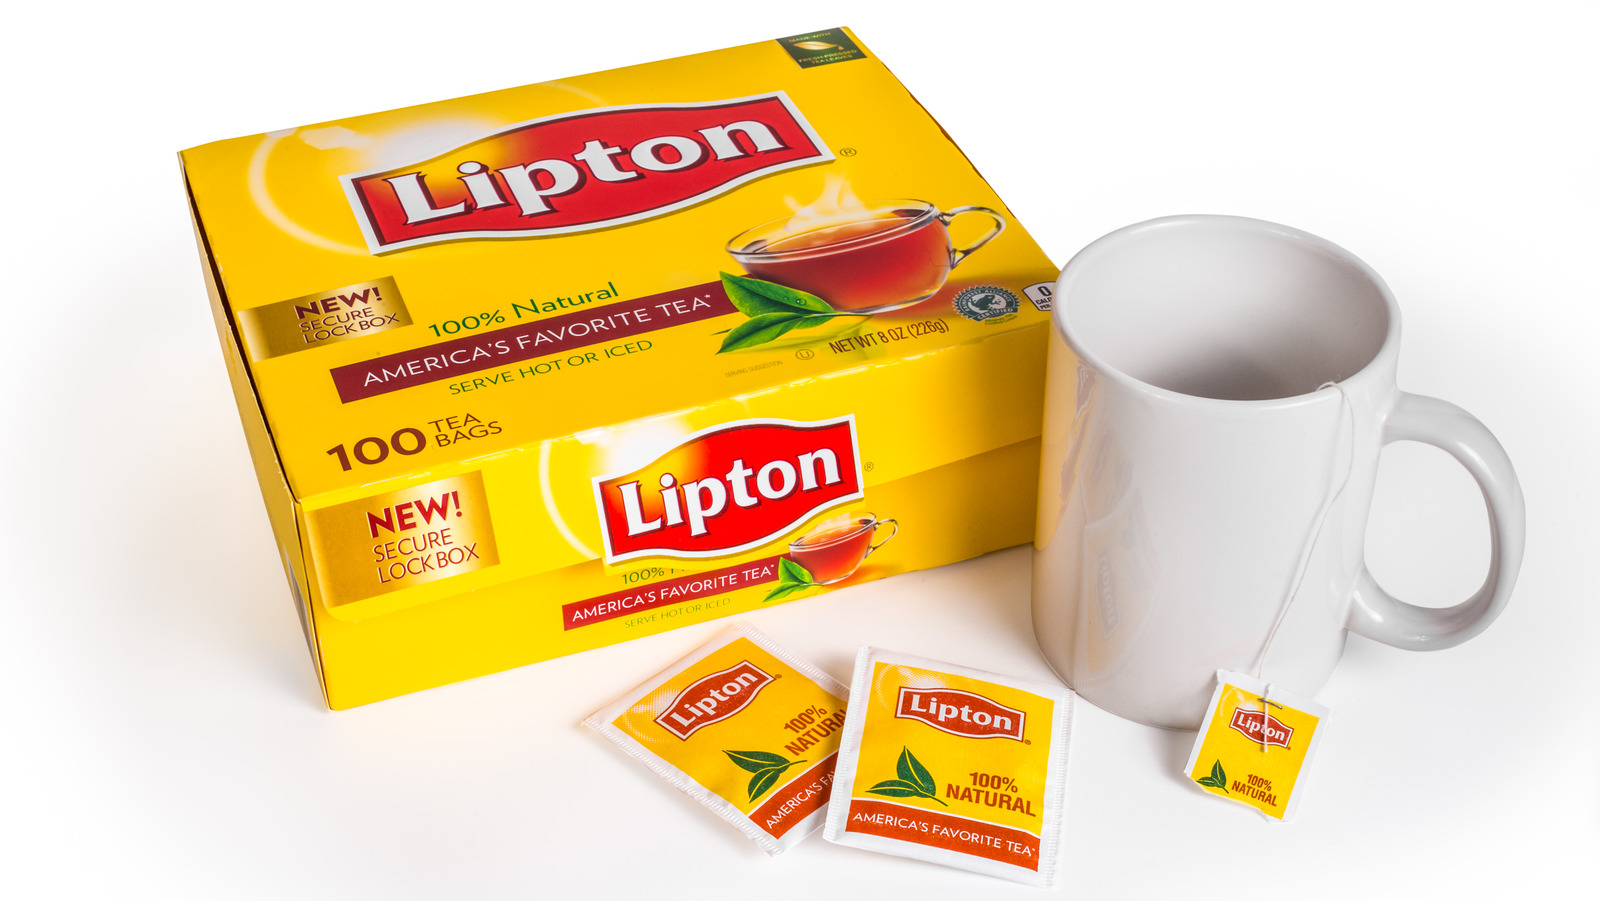 https://www.mashed.com/img/gallery/lipton-11-facts-tea-drinkers-need-to-know-about-the-brand/l-intro-1695998308.jpg